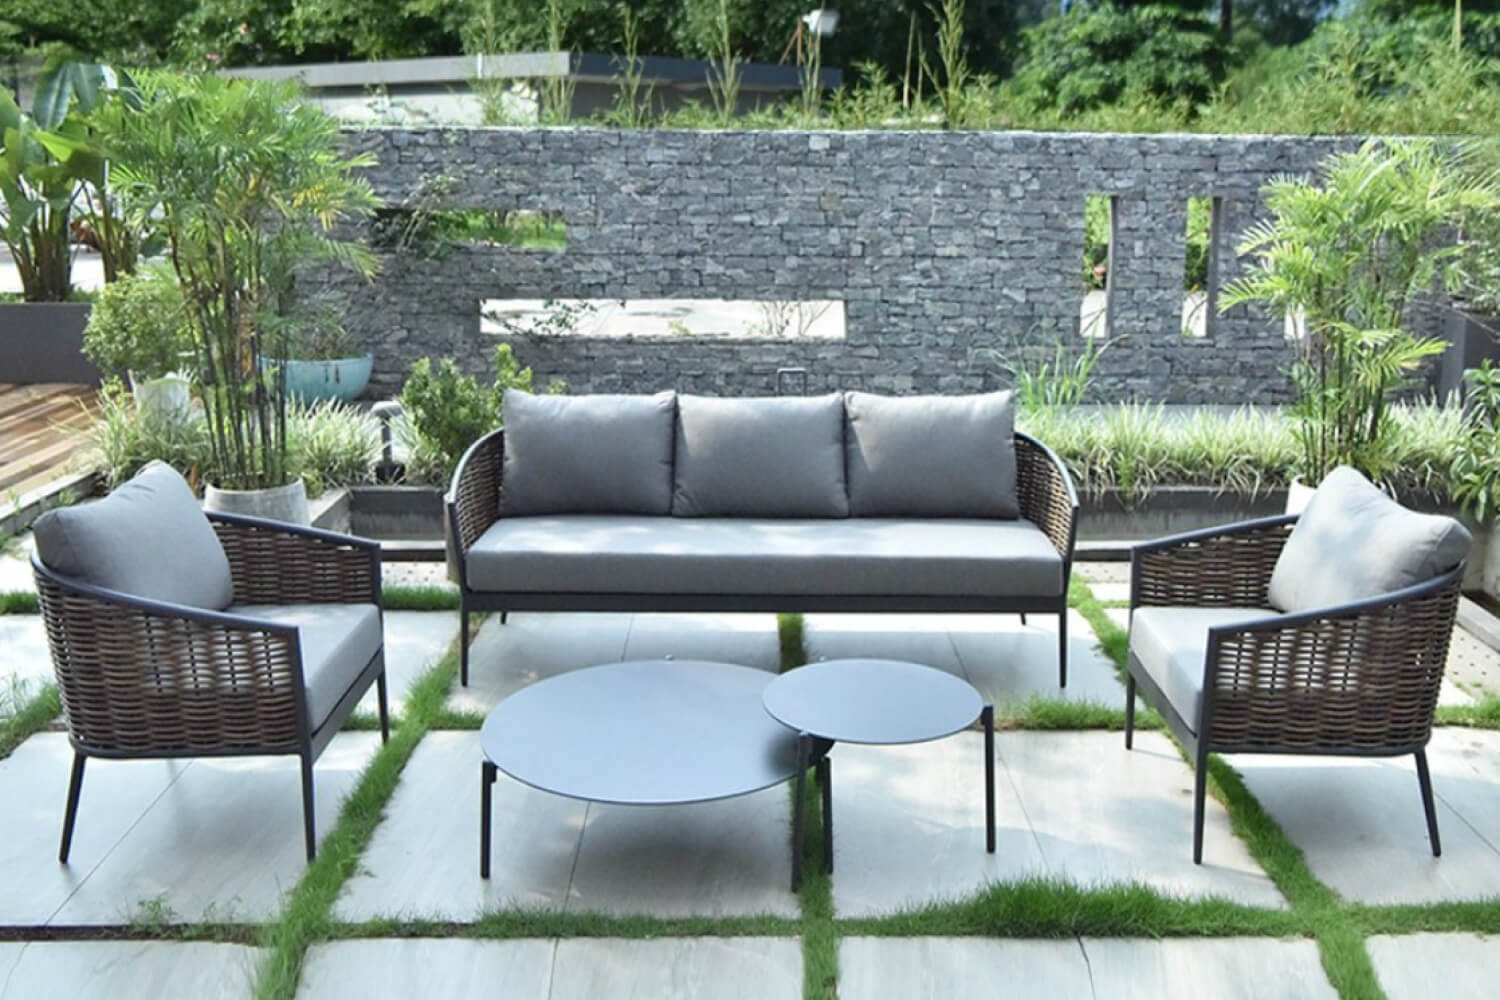 Malcom Grey 5-Piece Wicker Patio Sofa Set arranged on a garden patio, including a sofa, two chairs with cushions, and two round coffee tables, against a backdrop of lush greenery and a stone wall.